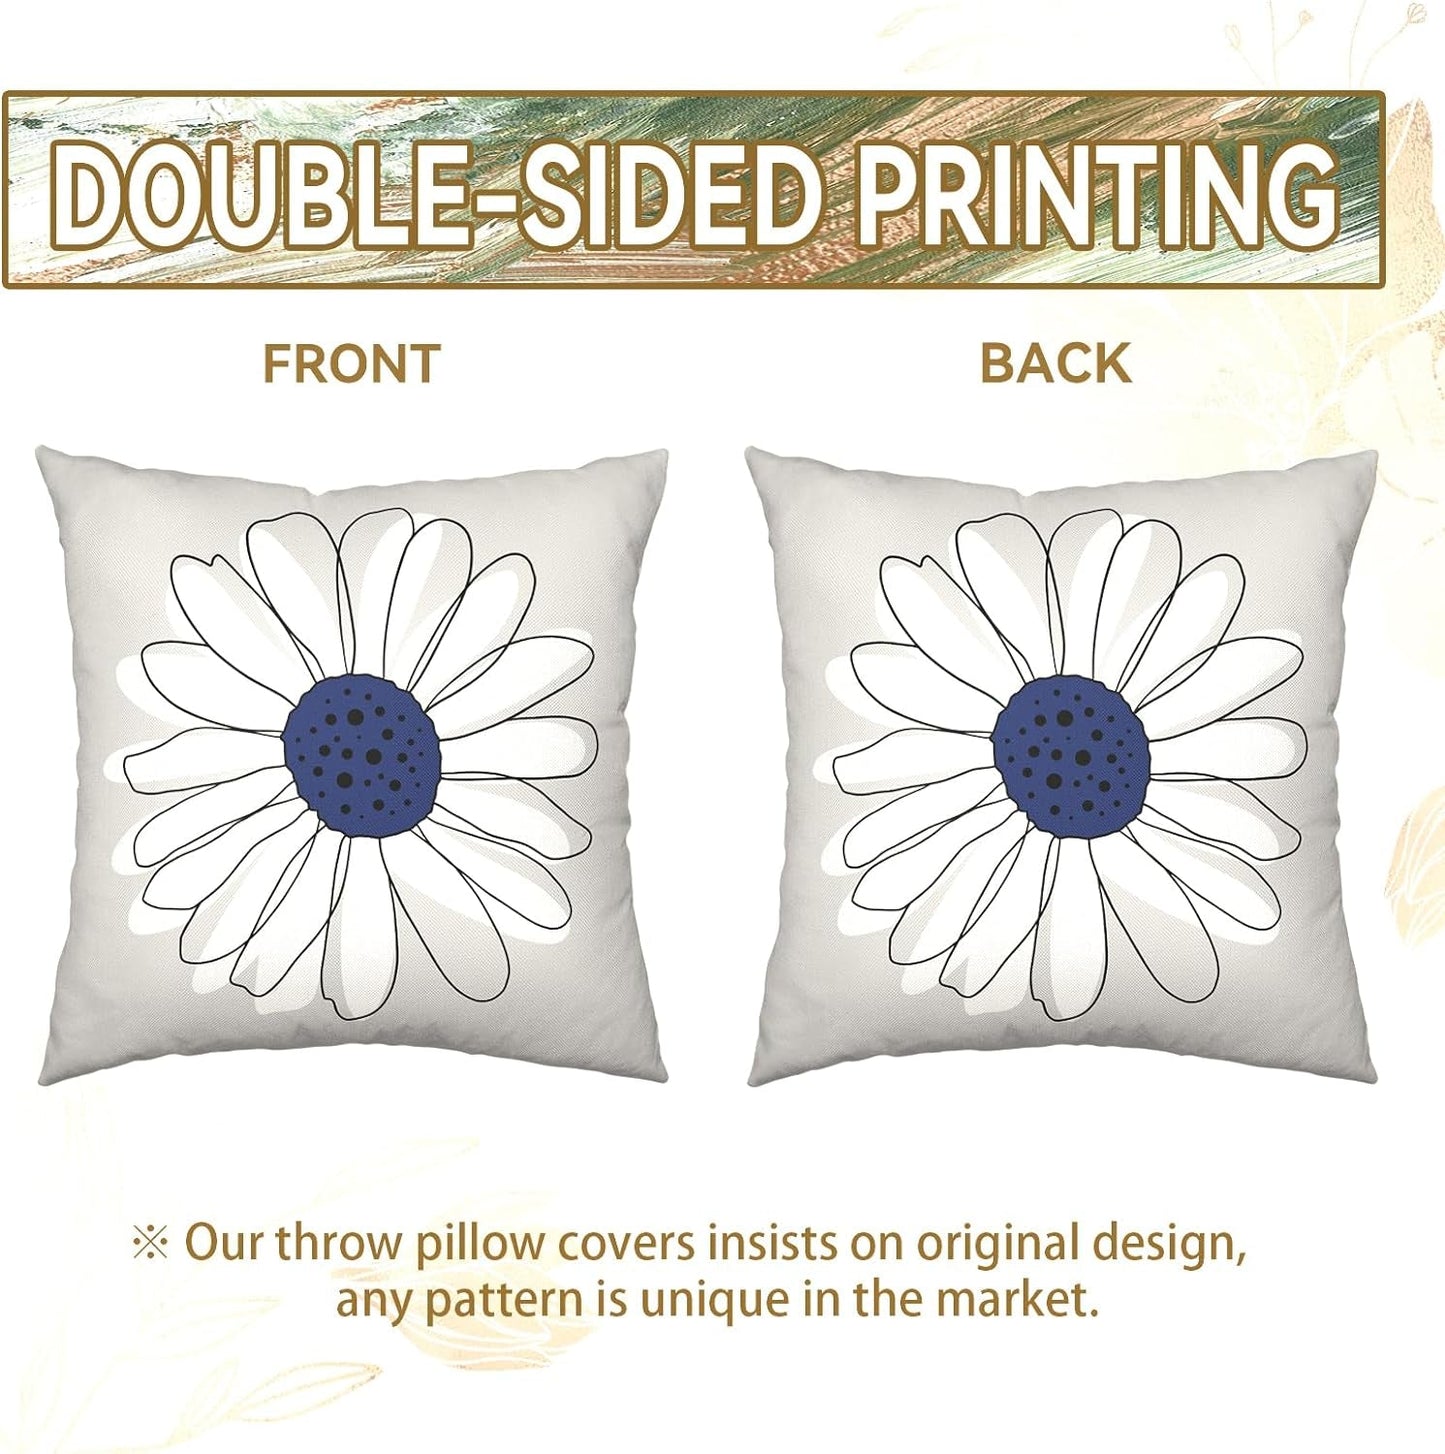 Summer Daisy Pillow Covers 16X16 Inch Blue Gray Throw Pillow Cases Seasonal Floral Pillowcase Flower Cotton Linen Outdoor Cushion Covers Home Decorations for Bed Sofa Couch Set of 2